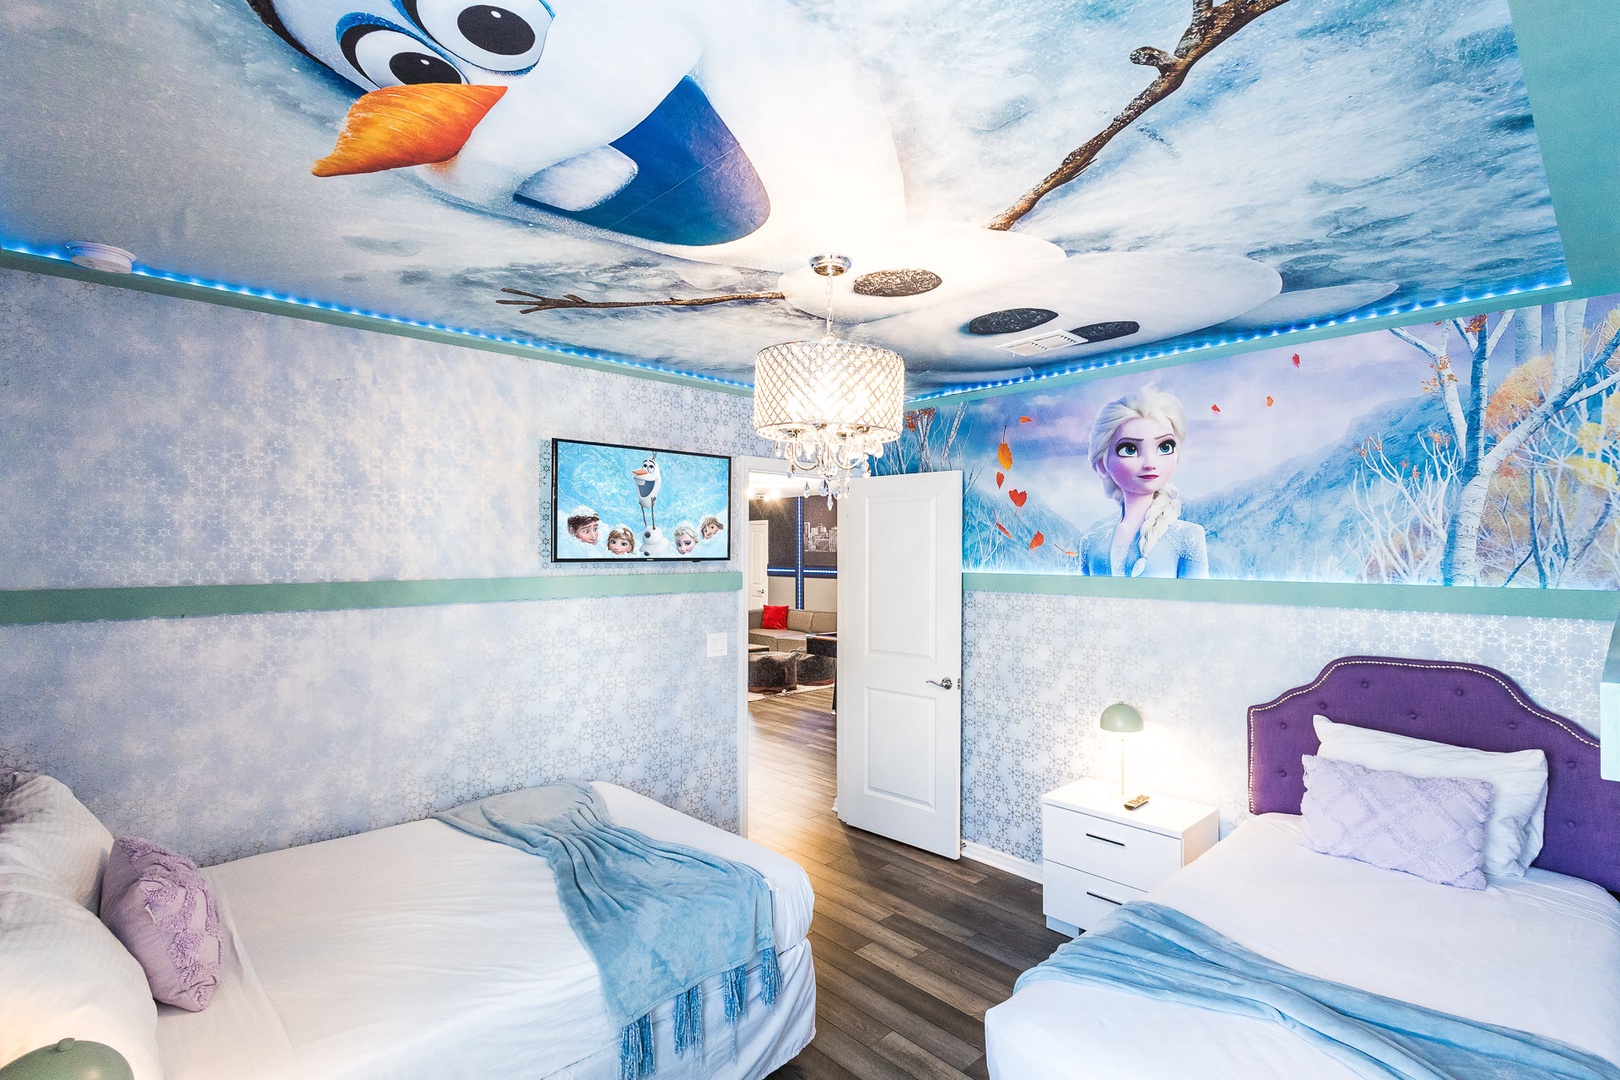 The Frozen themed room is Worth Melting For with a Full bed, and Twin bed